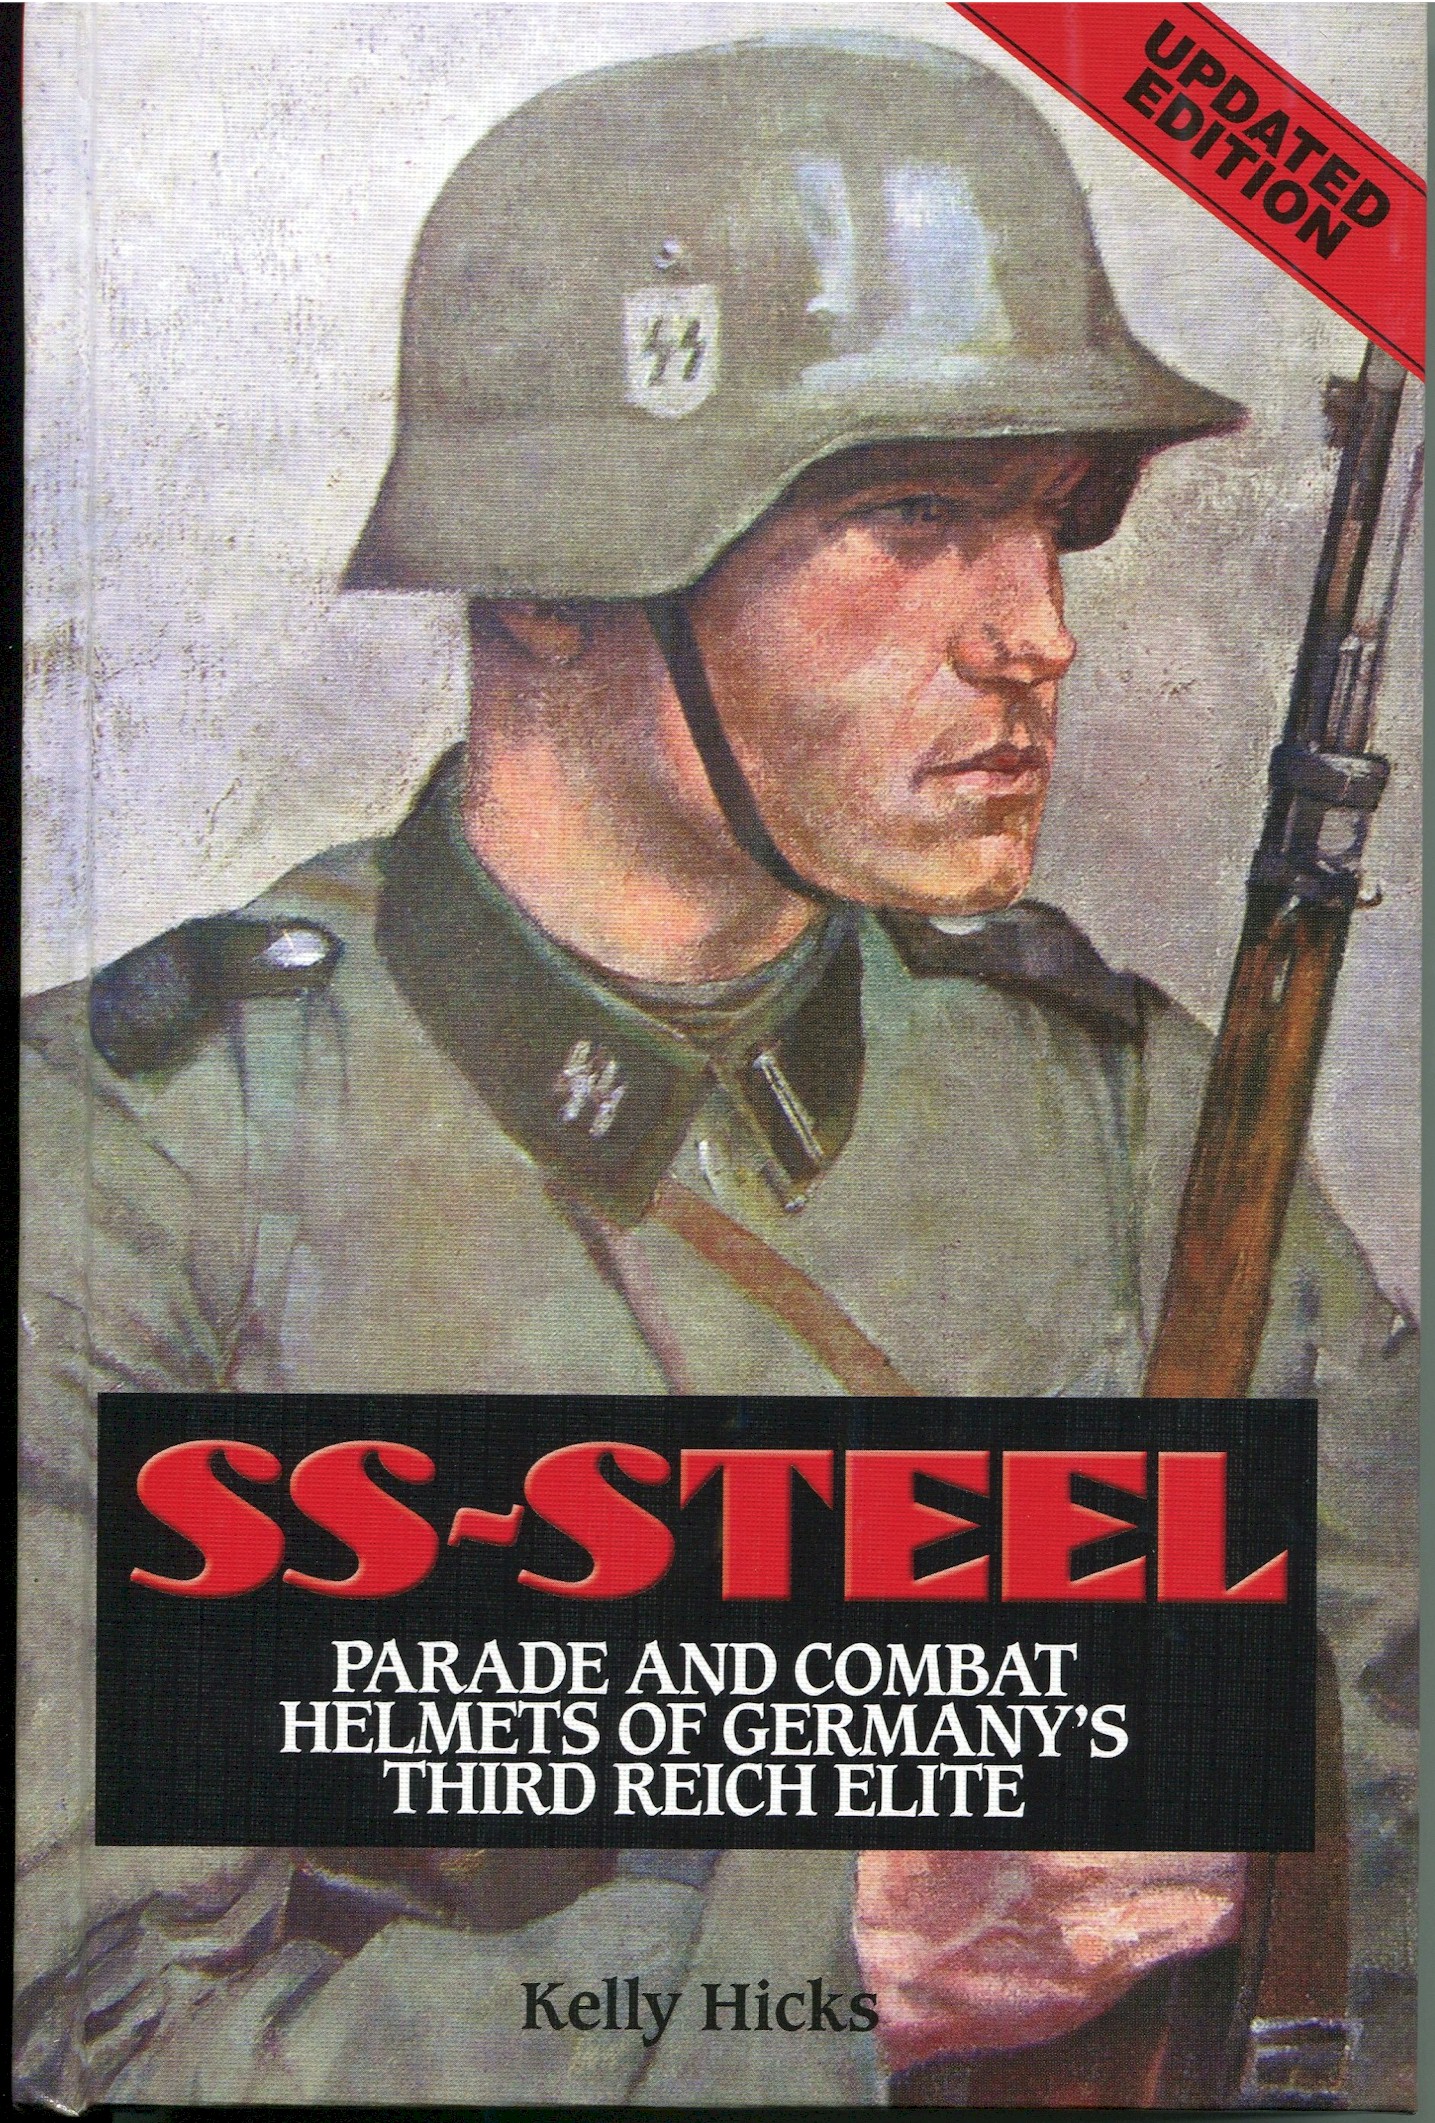 SS-STEEL PARADE AND COMBAT HELMETS OF GERMANY'S THIRD REICH ELITE - UPDATED EDITION